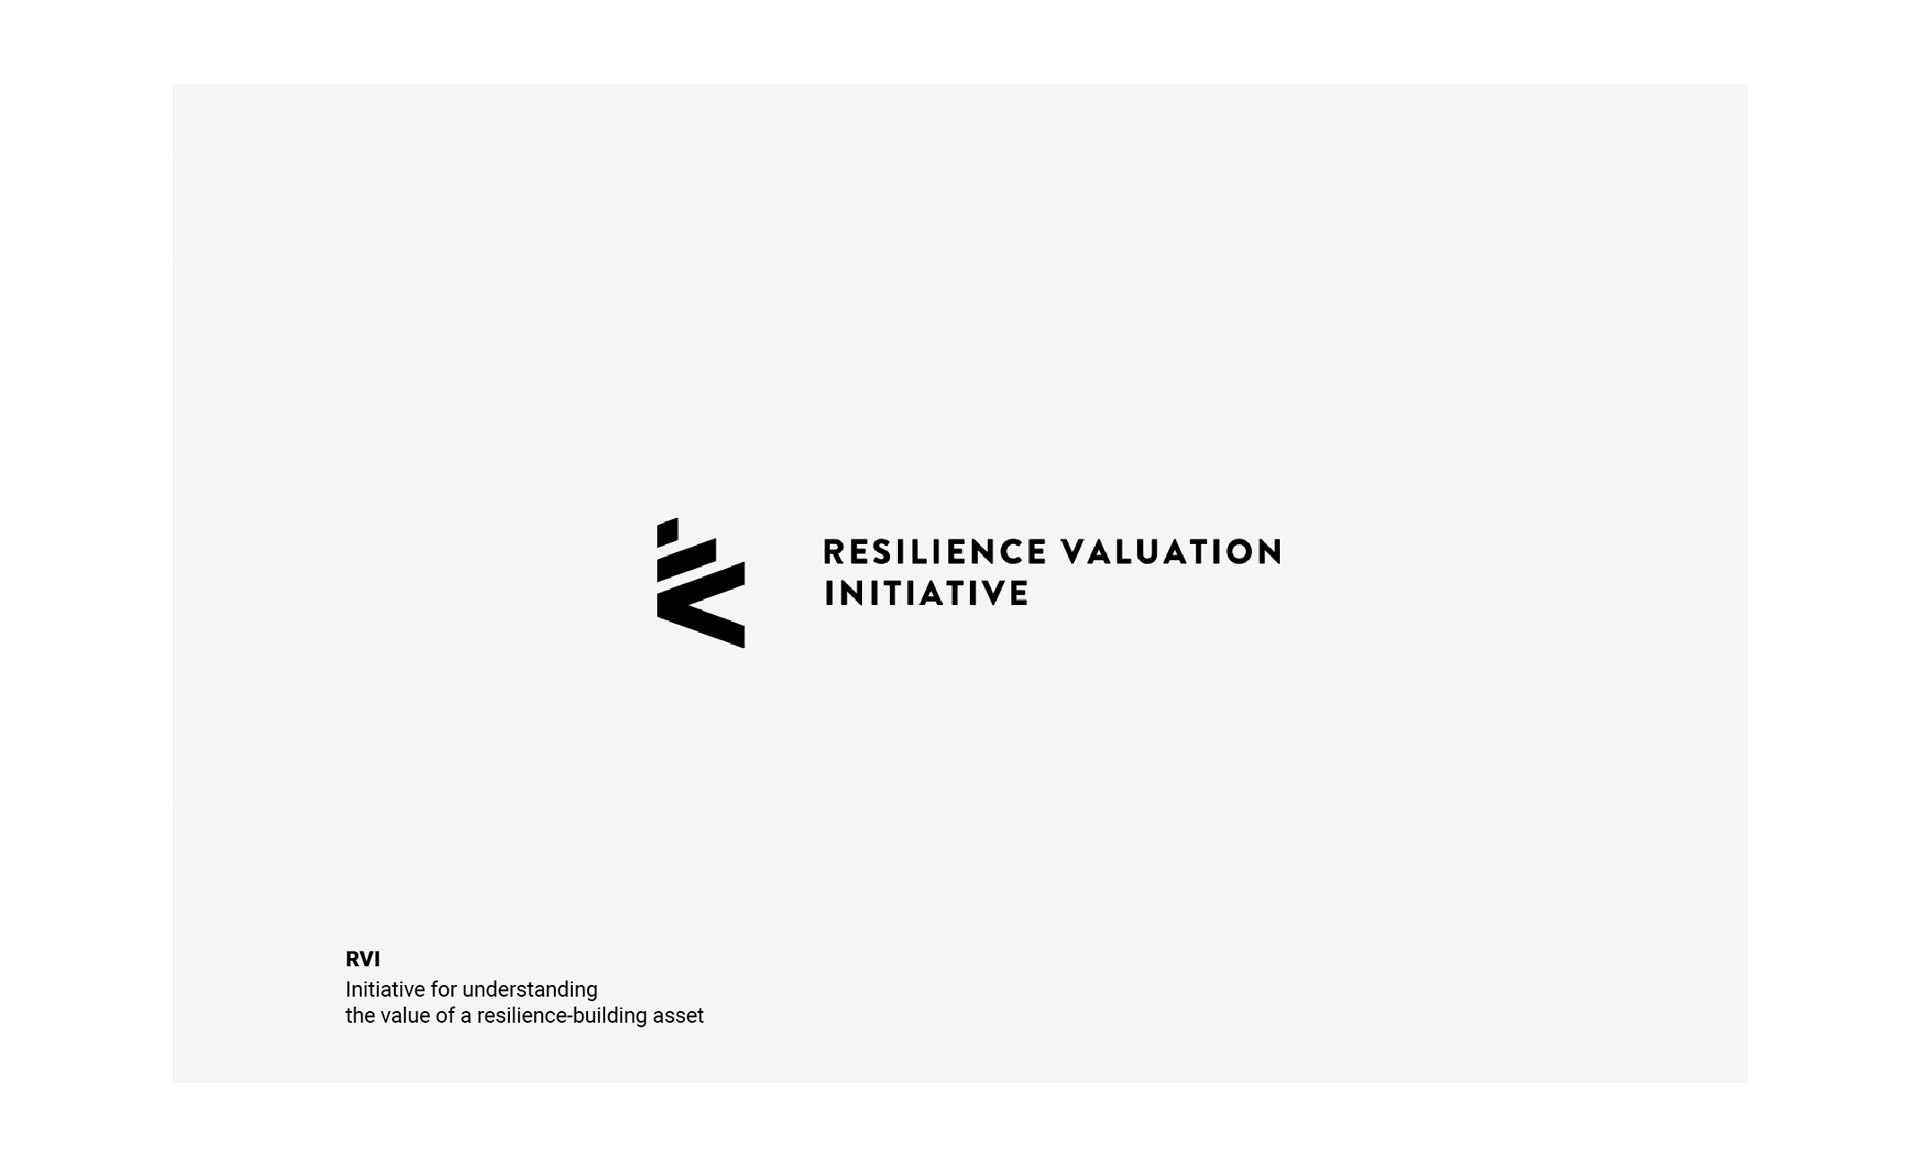 Logo for The Resilience Valuation Initiative